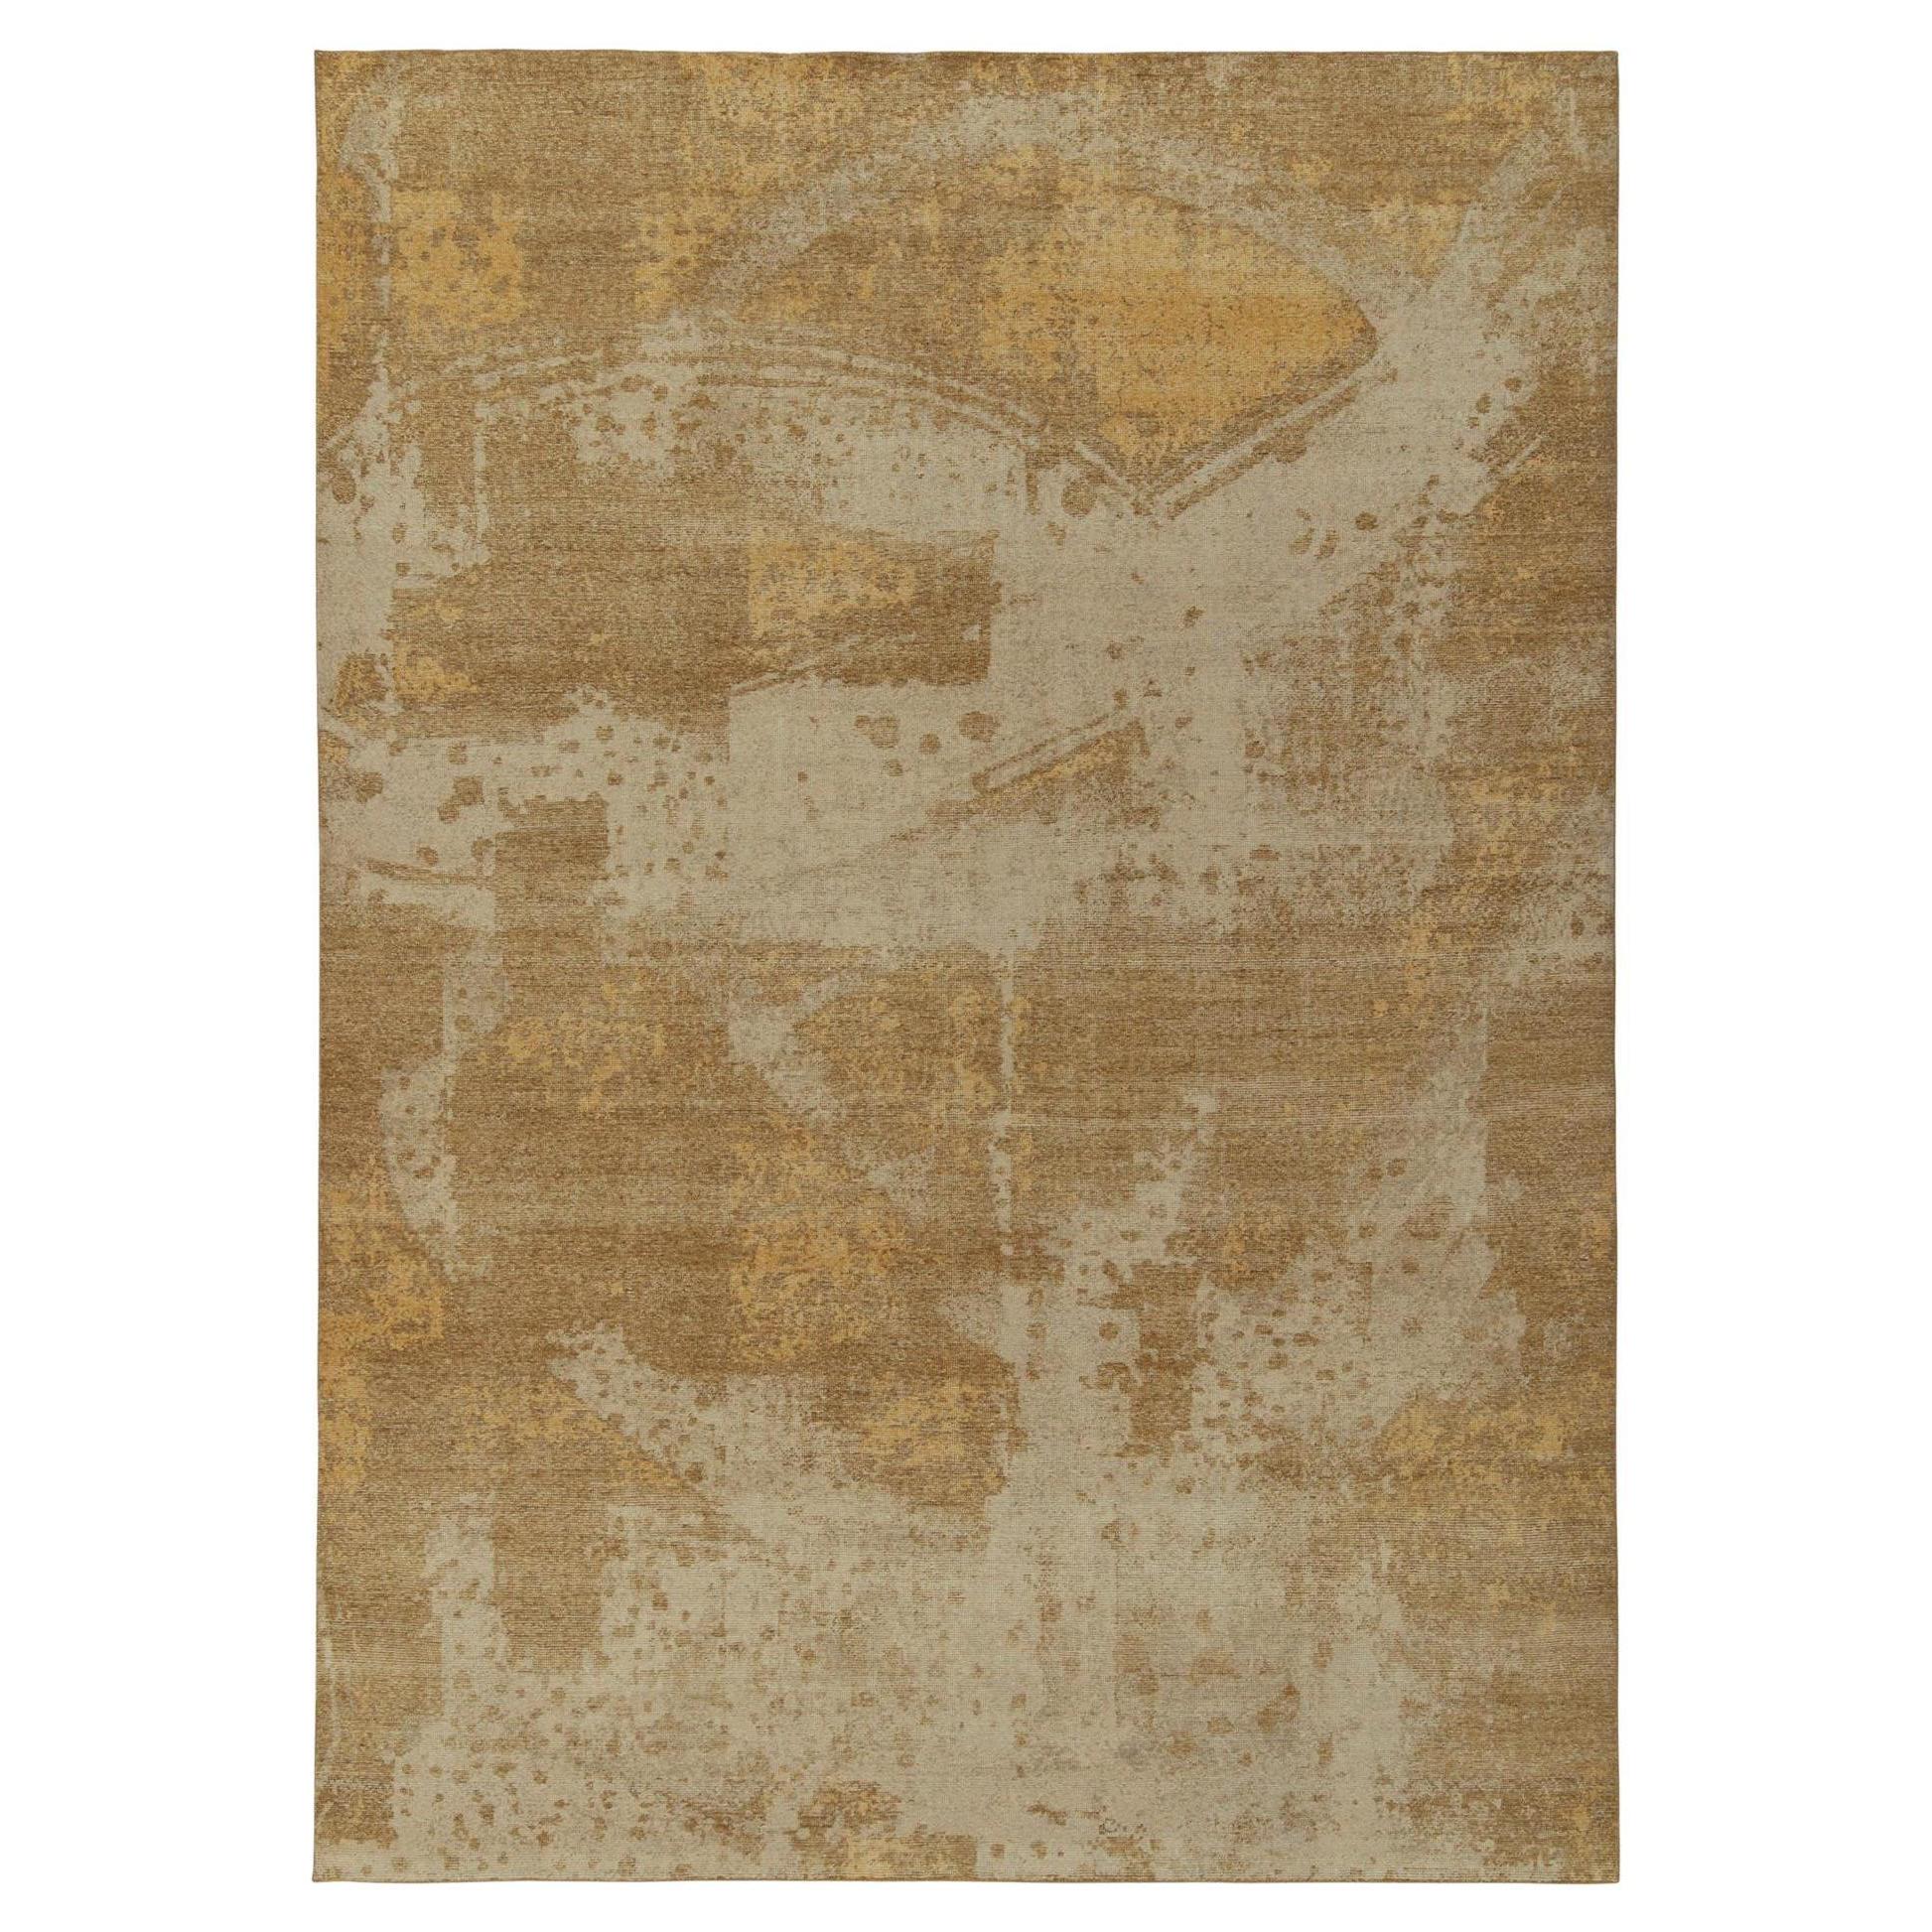 Rug & Kilim’s Distressed Style Abstract Rug in Beige, Ochre Patterns For Sale